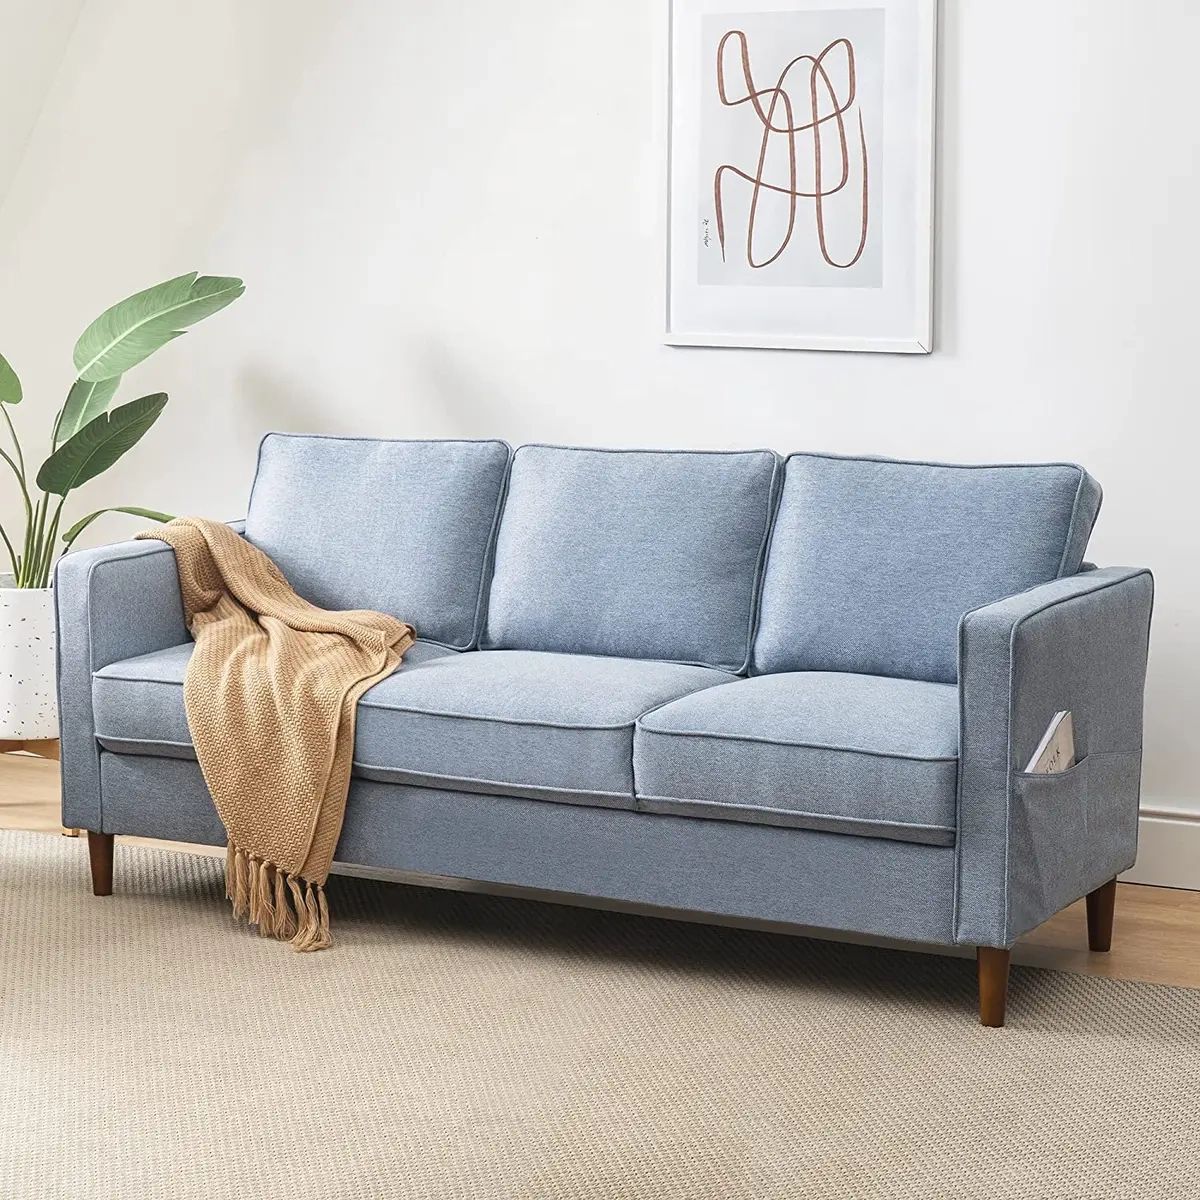 Hana Modern Linen Fabric Loveseat/sofa/couch With Armrest Pockets, Dusty  Blue | Ebay Pertaining To Modern Blue Linen Sofas (Photo 2 of 15)